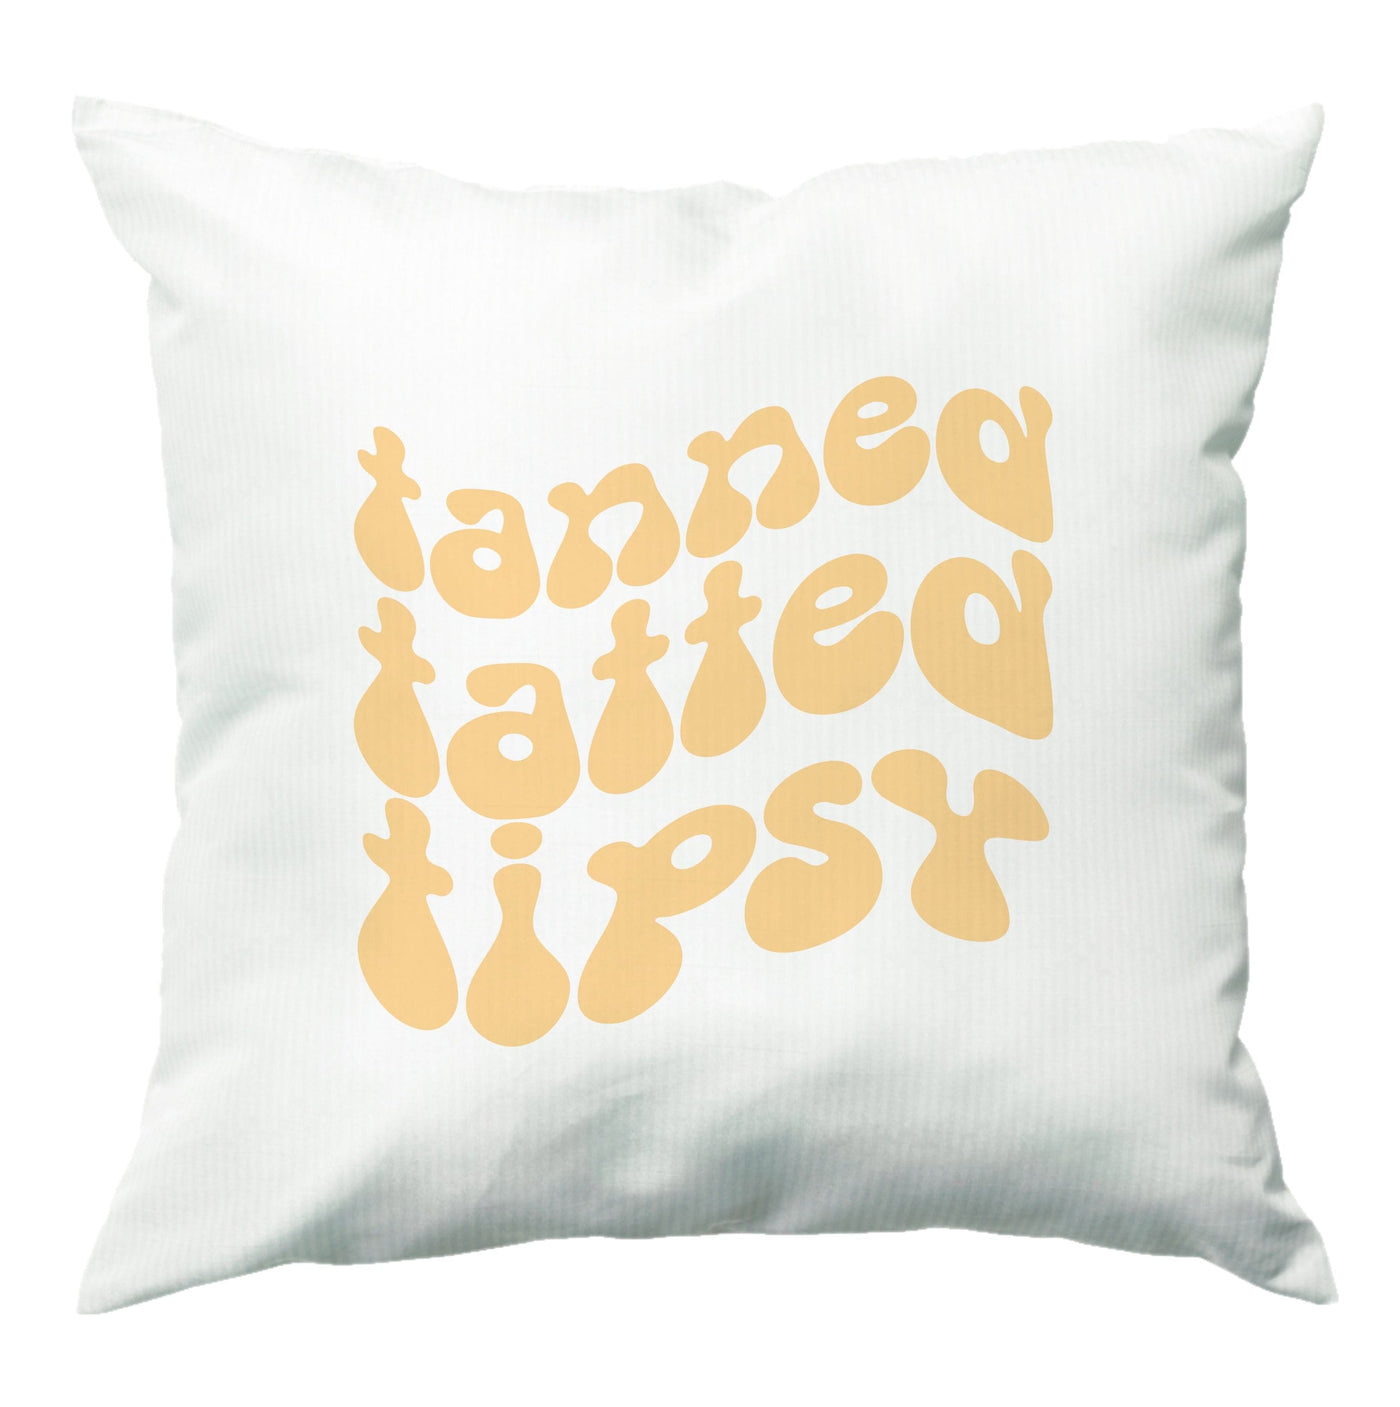 Tanned Tatted Tipsy - Summer Quotes Cushion